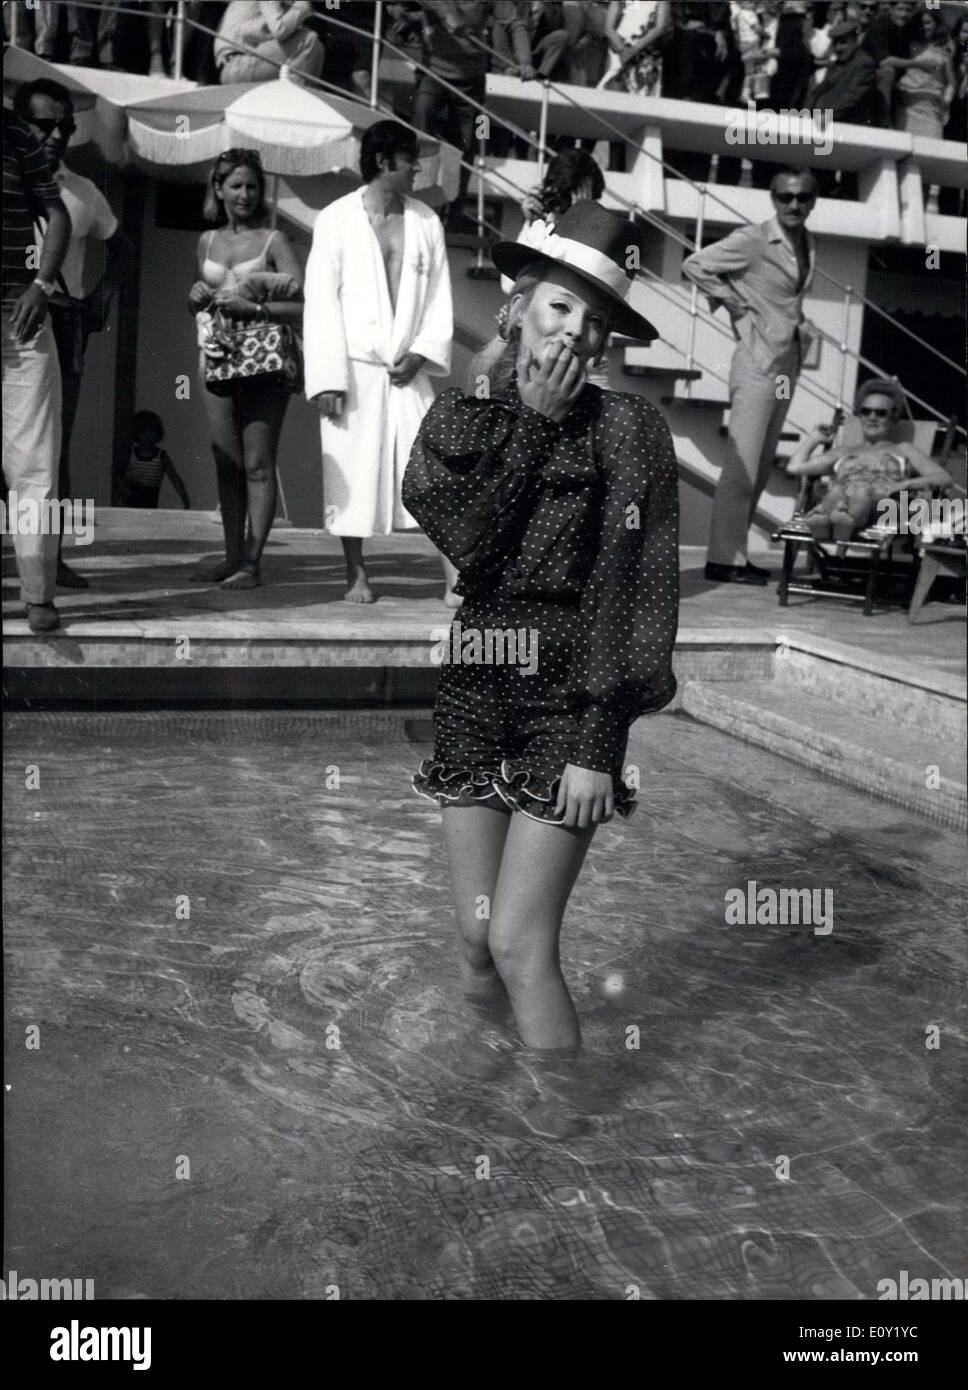 May 16, 1968 - Cannes Film Festival : Photo shows Genevieve Waite who stars in Joanna, A film shown at the film festival now being held at Cannes pictured in the fashionable coisette swimming pool. Stock Photo